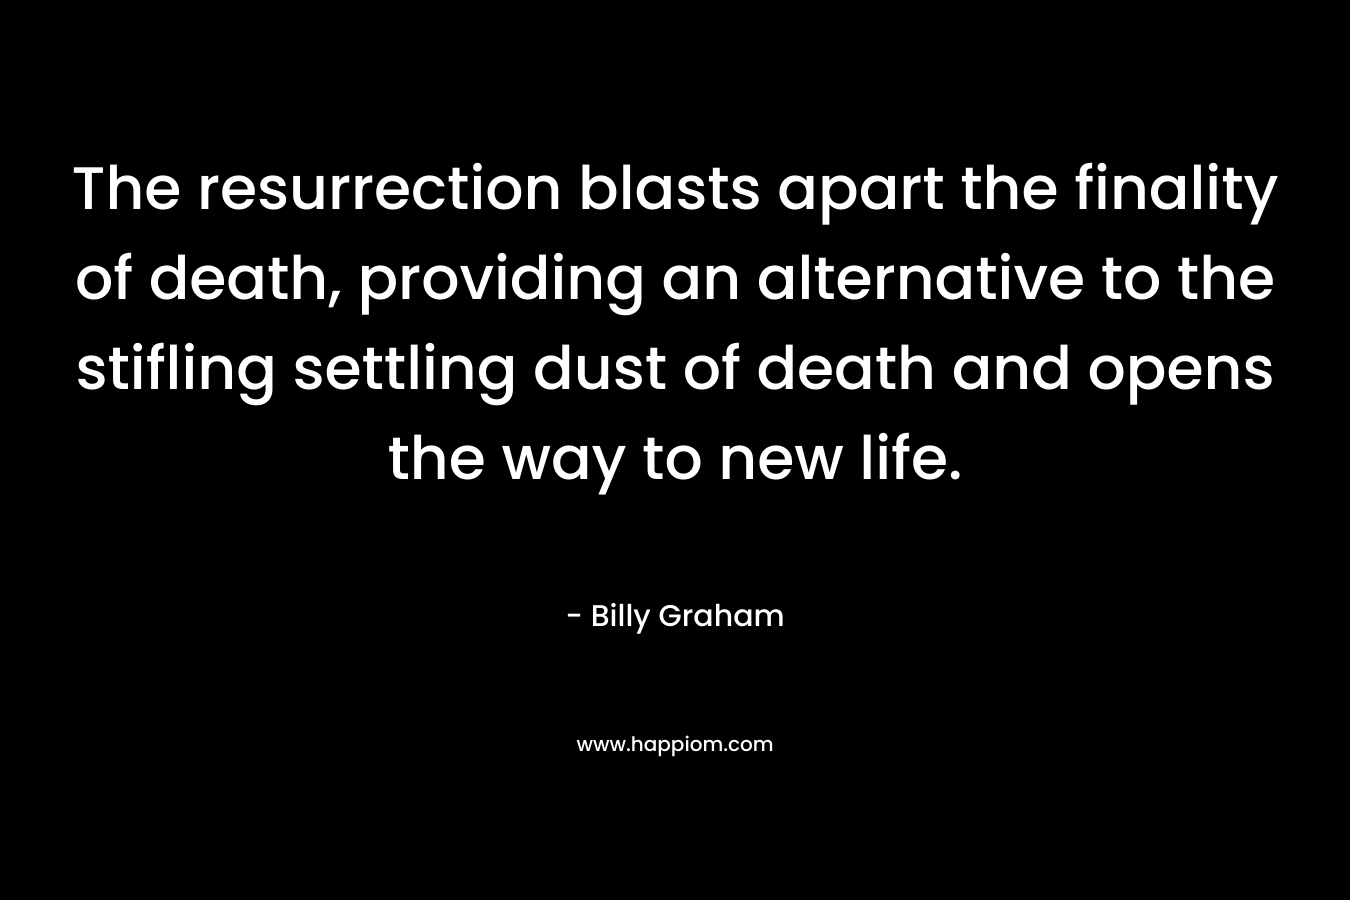 The resurrection blasts apart the finality of death, providing an alternative to the stifling settling dust of death and opens the way to new life.